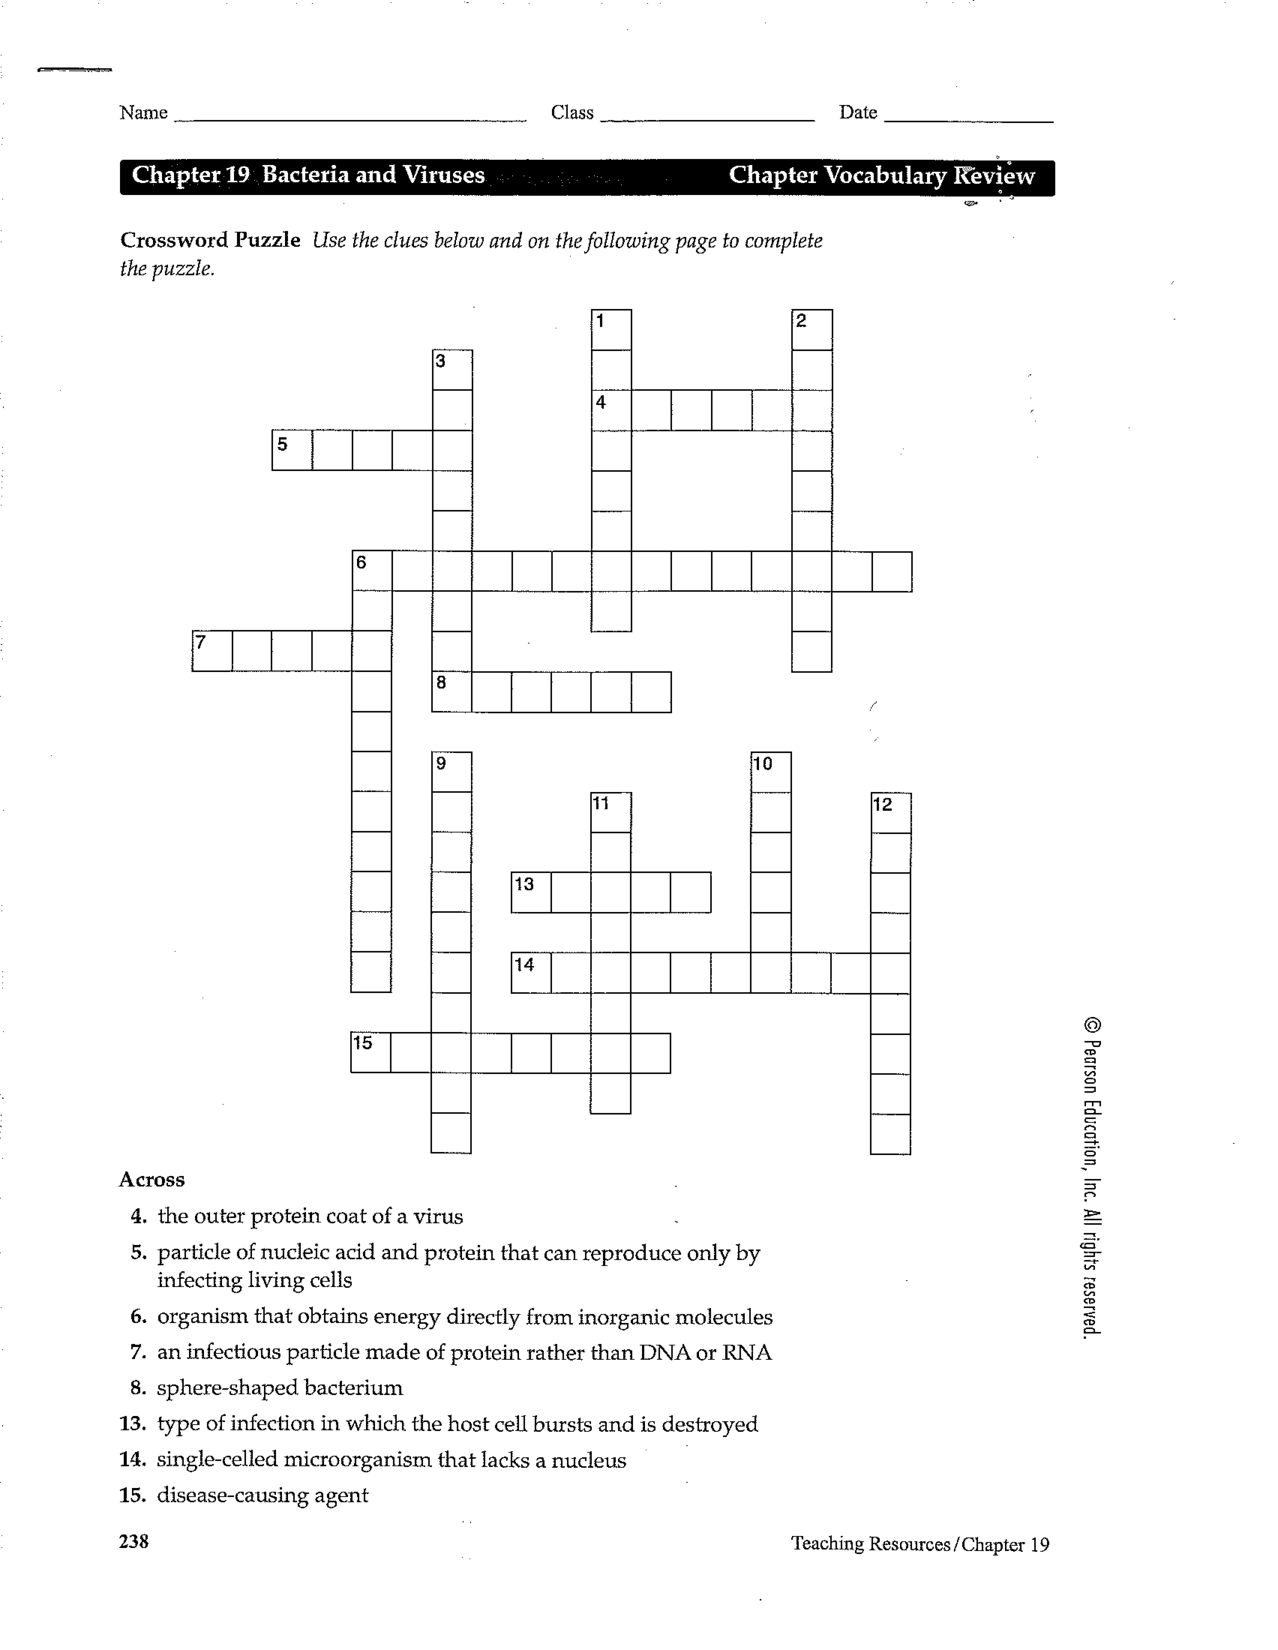 Chapter 19 Bacteria and Viruses Crossword Answers Image